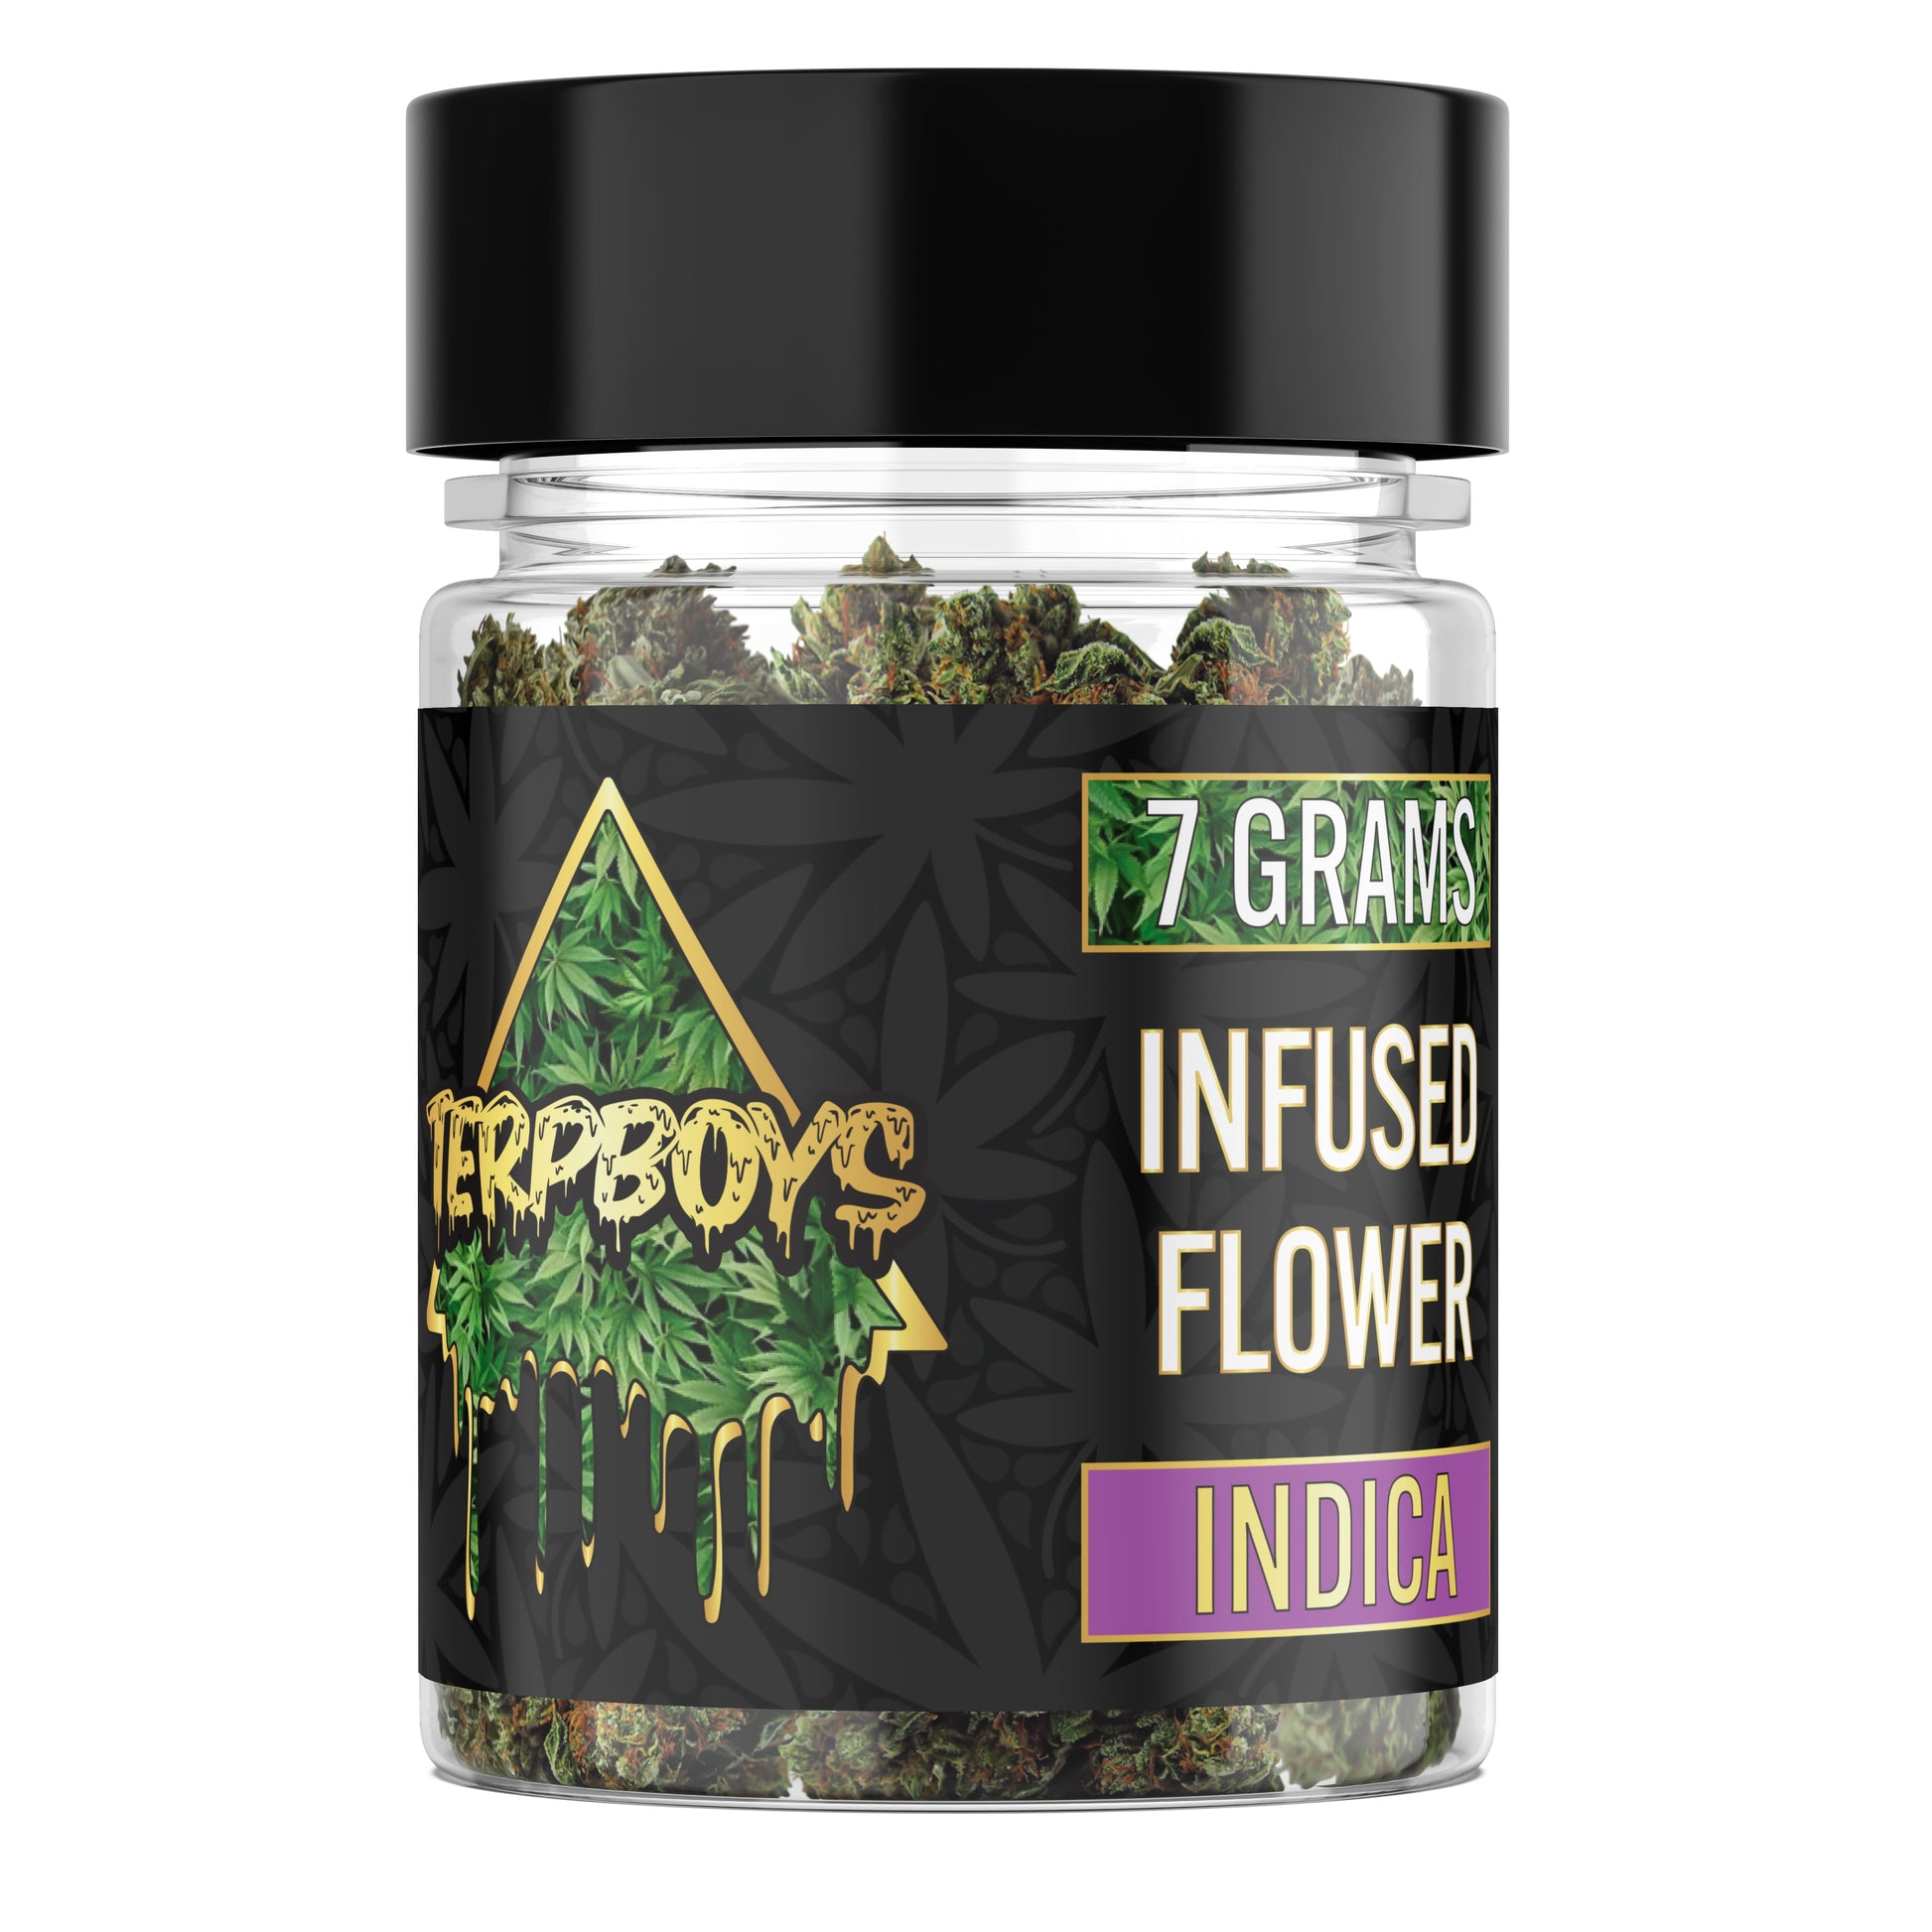 HHC Infused Flower Zkittles Indica